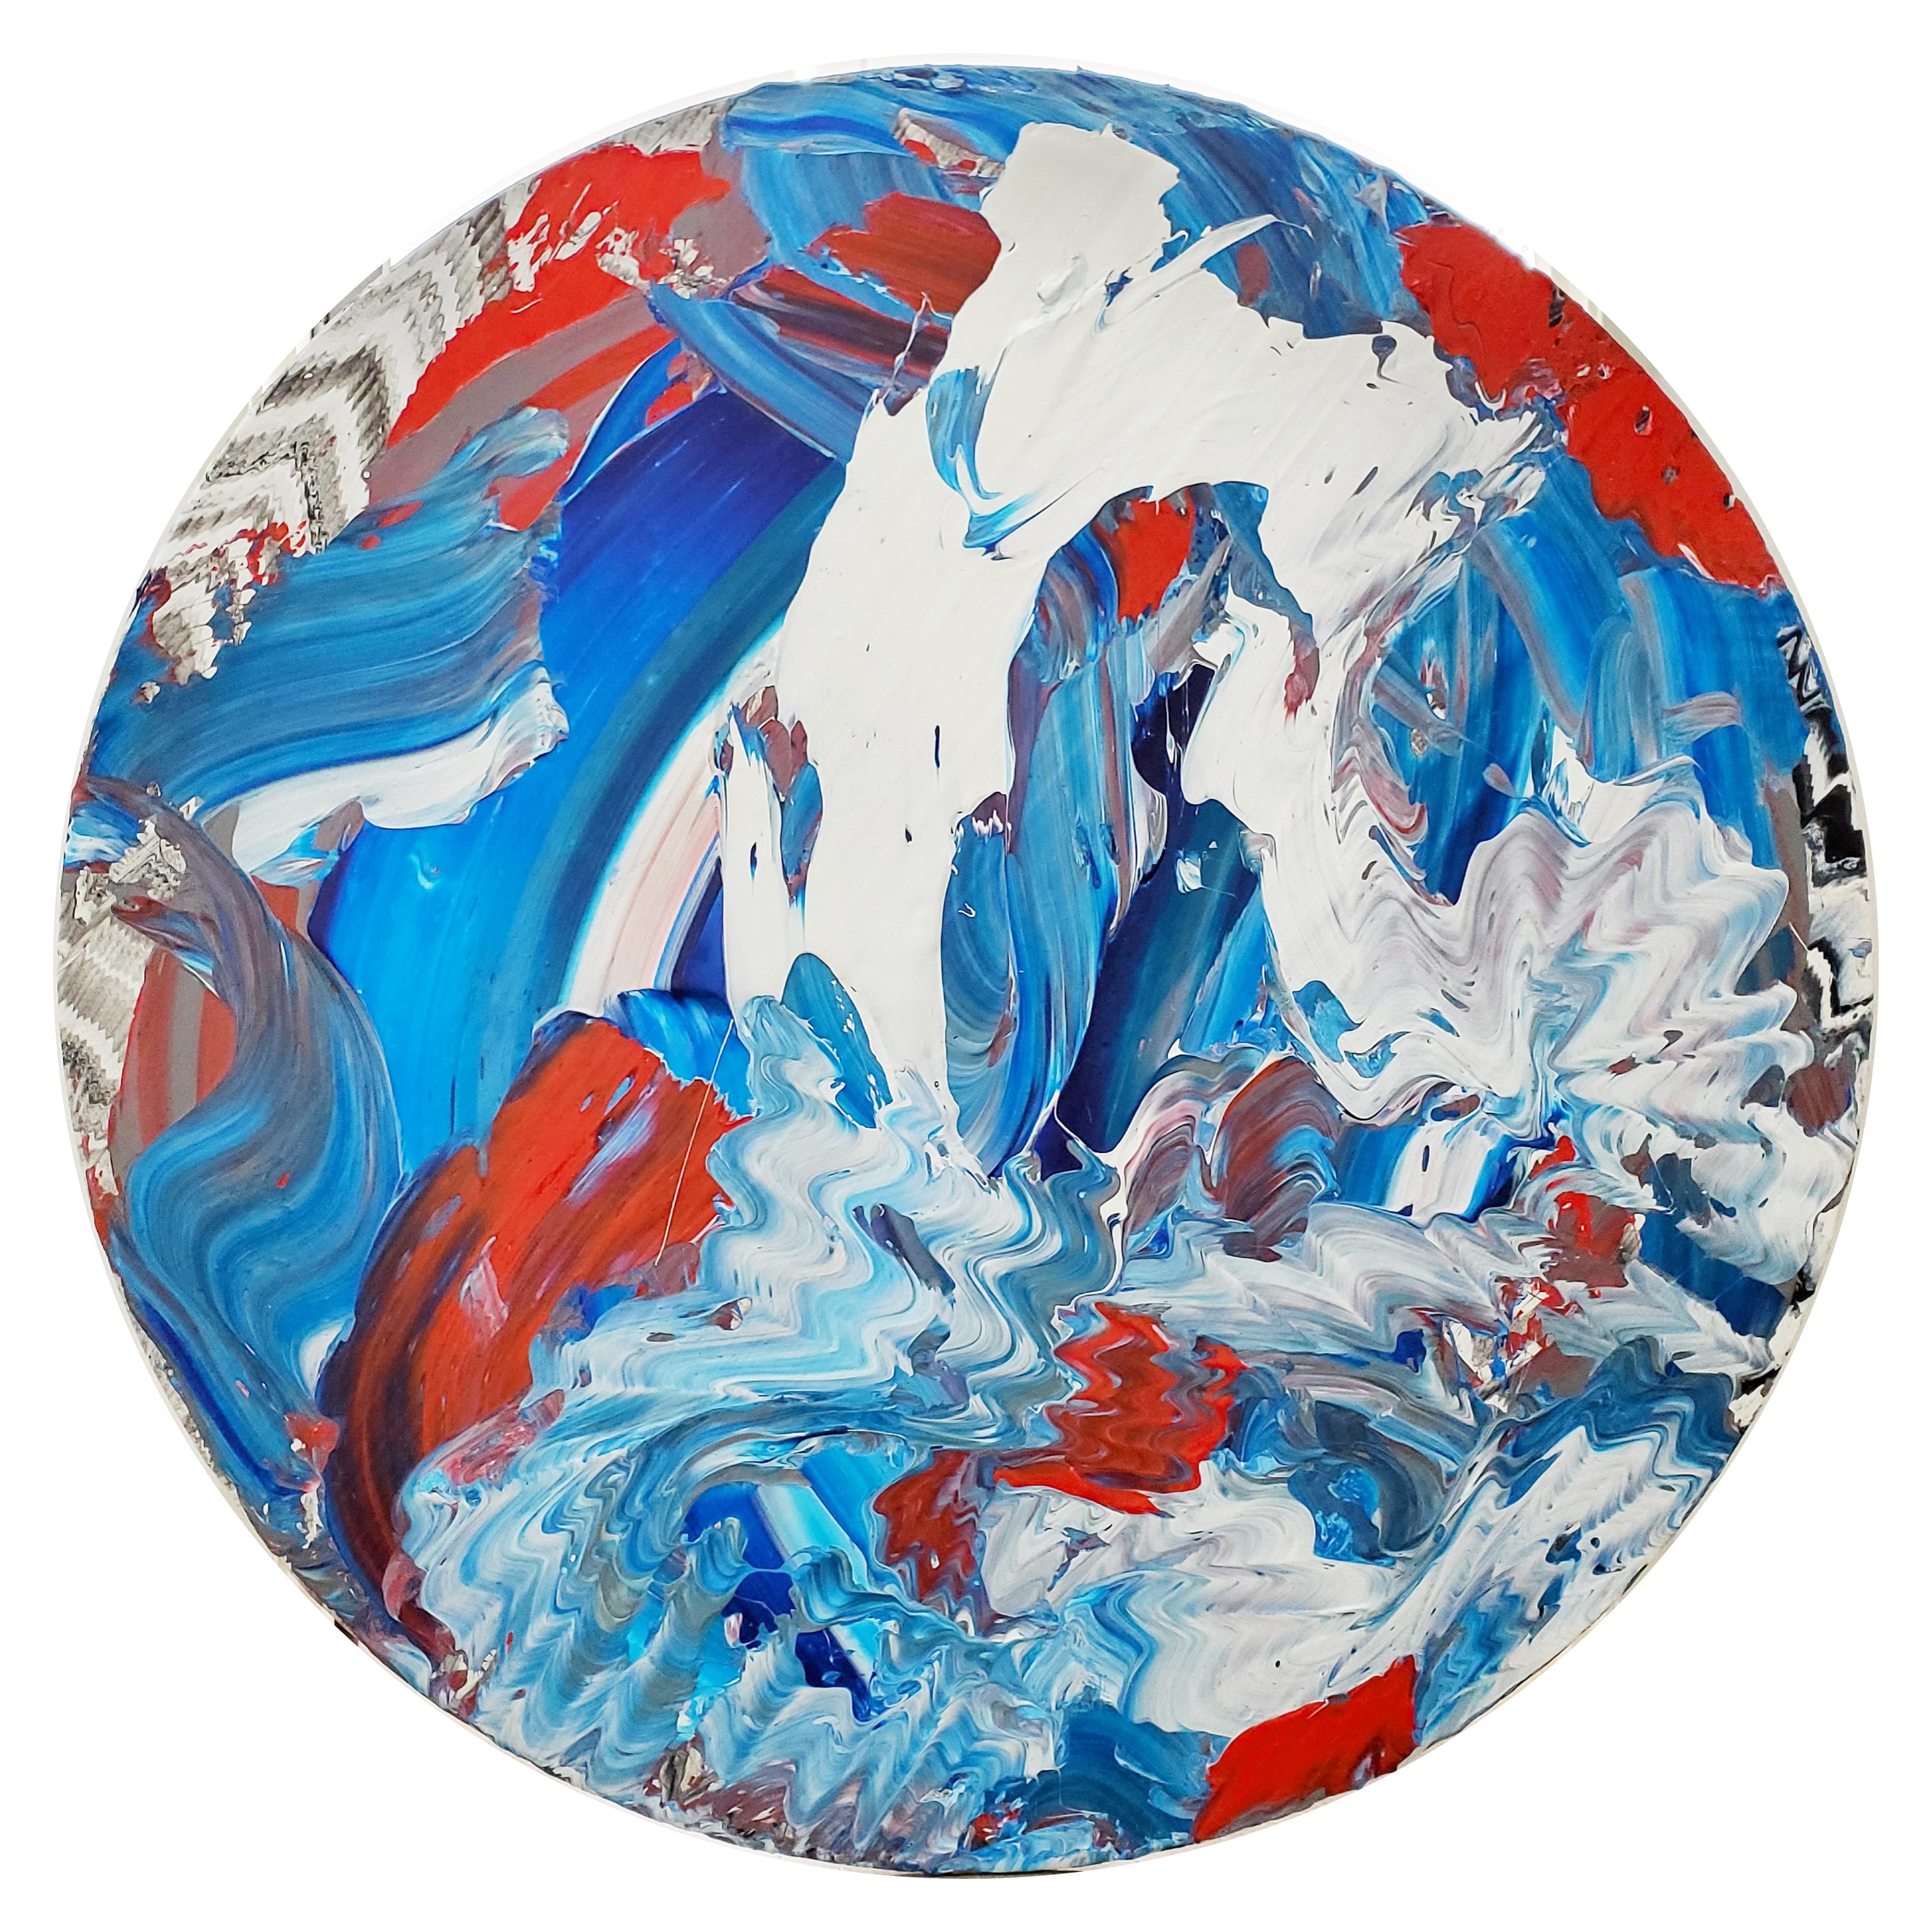 Abstract Painting Robert Standish  - Energy Within - Peinture abstraite circulaire, bleue, blanche et orange 